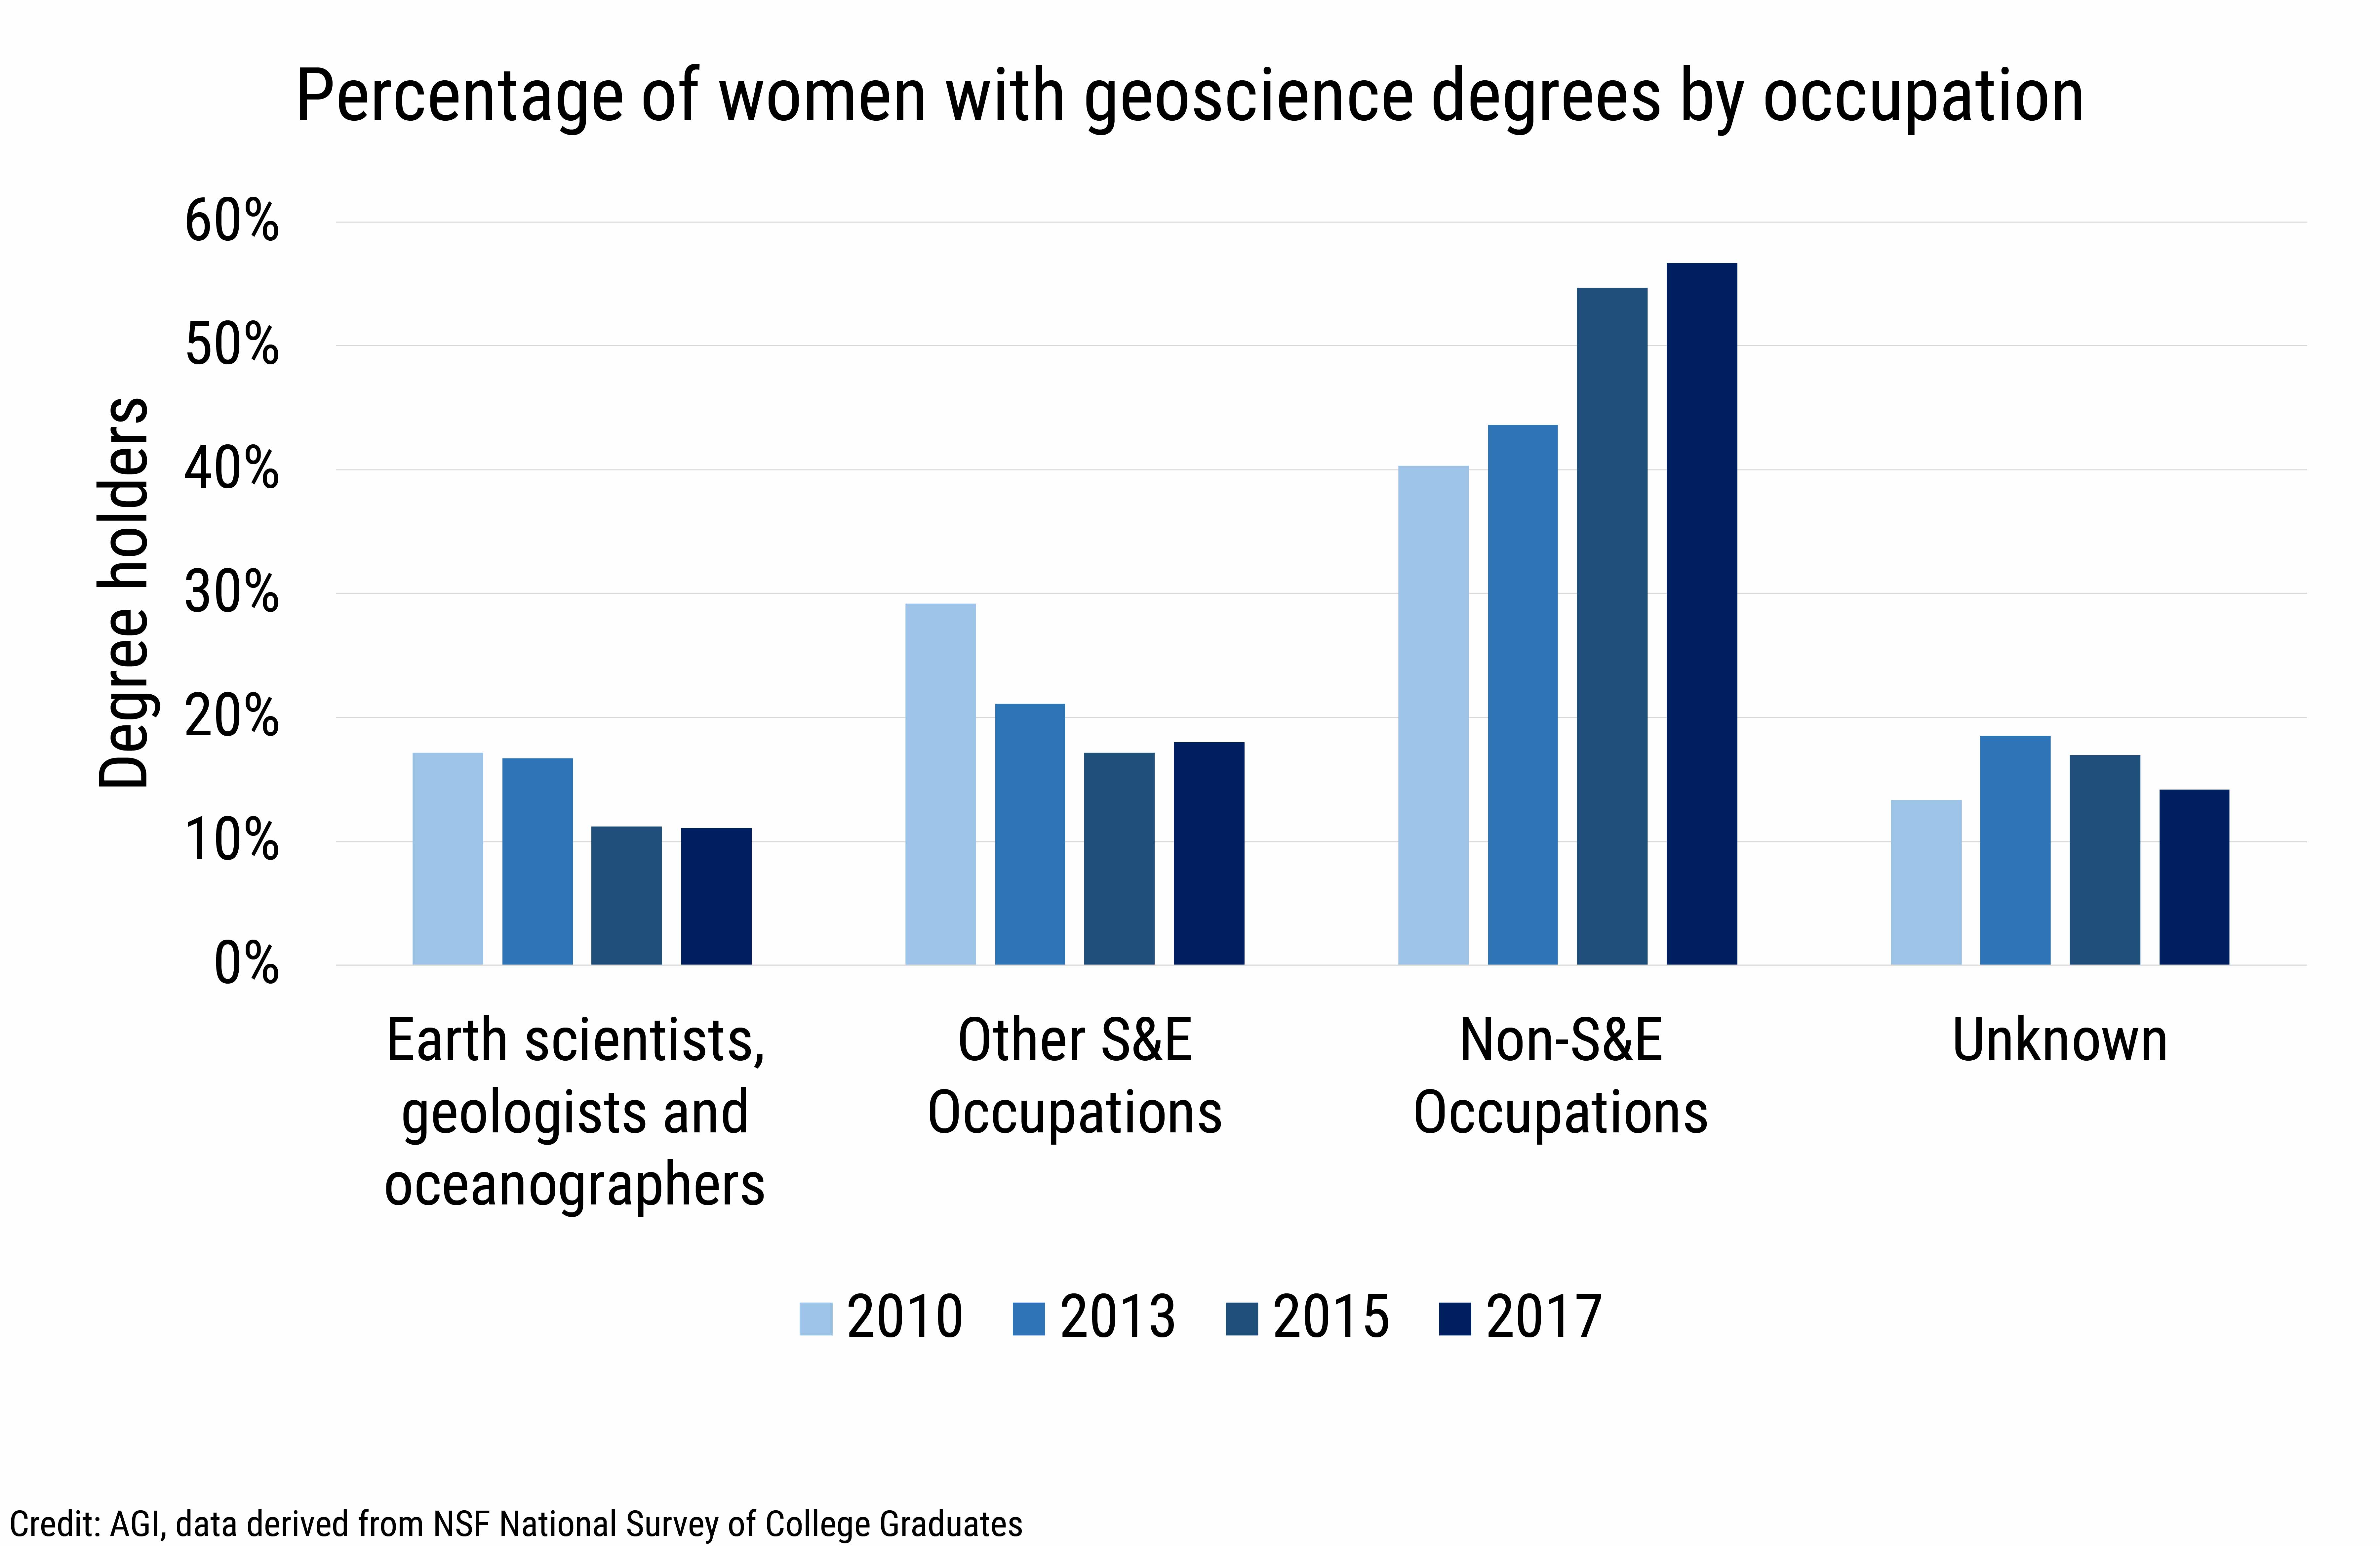 DB2020-023 chart12-Percentage of women with geoscience degrees by occupation (Credit: AGI, data derived from NSF National Survey of College Graduates)